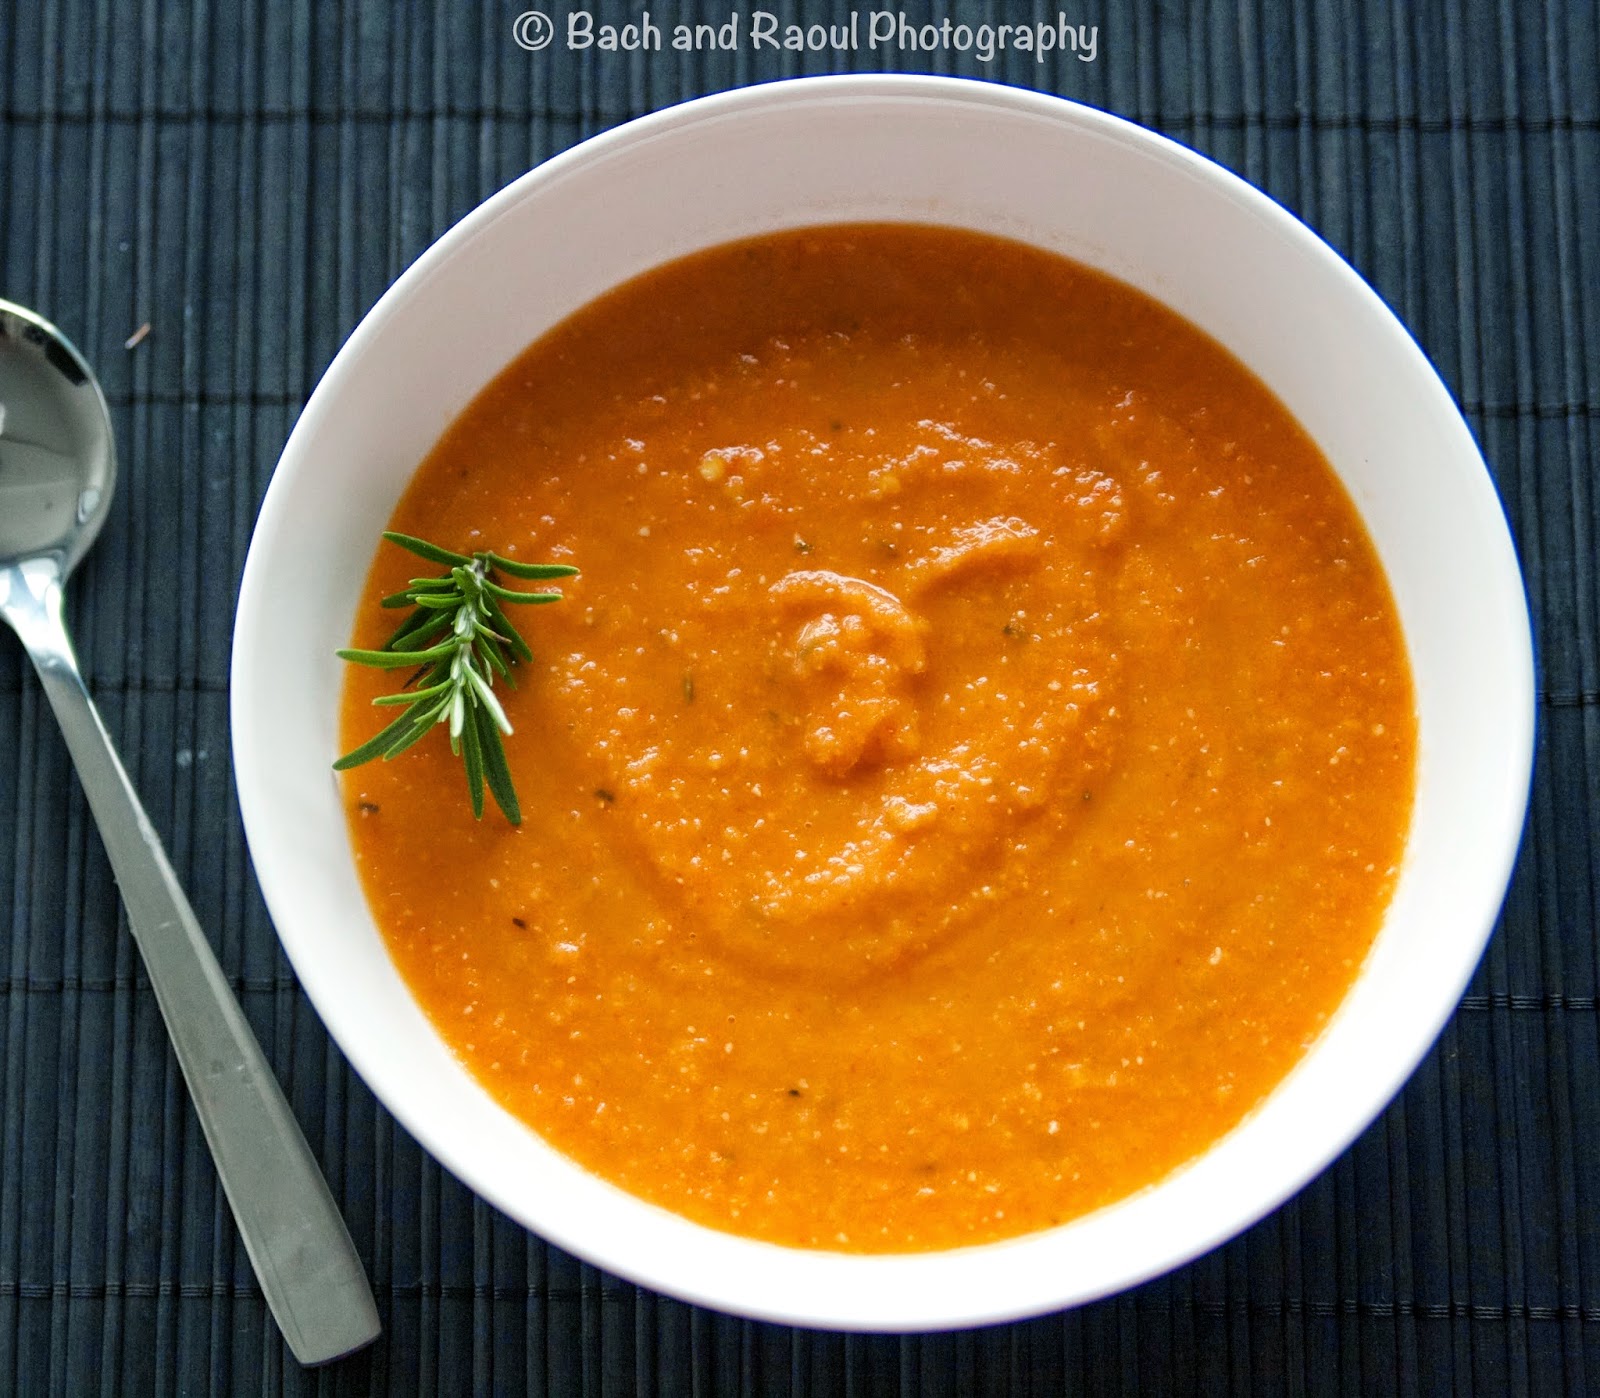 Roasted Bell Pepper and Tomato Soup with Black Pepper and Rosemary - Vegan